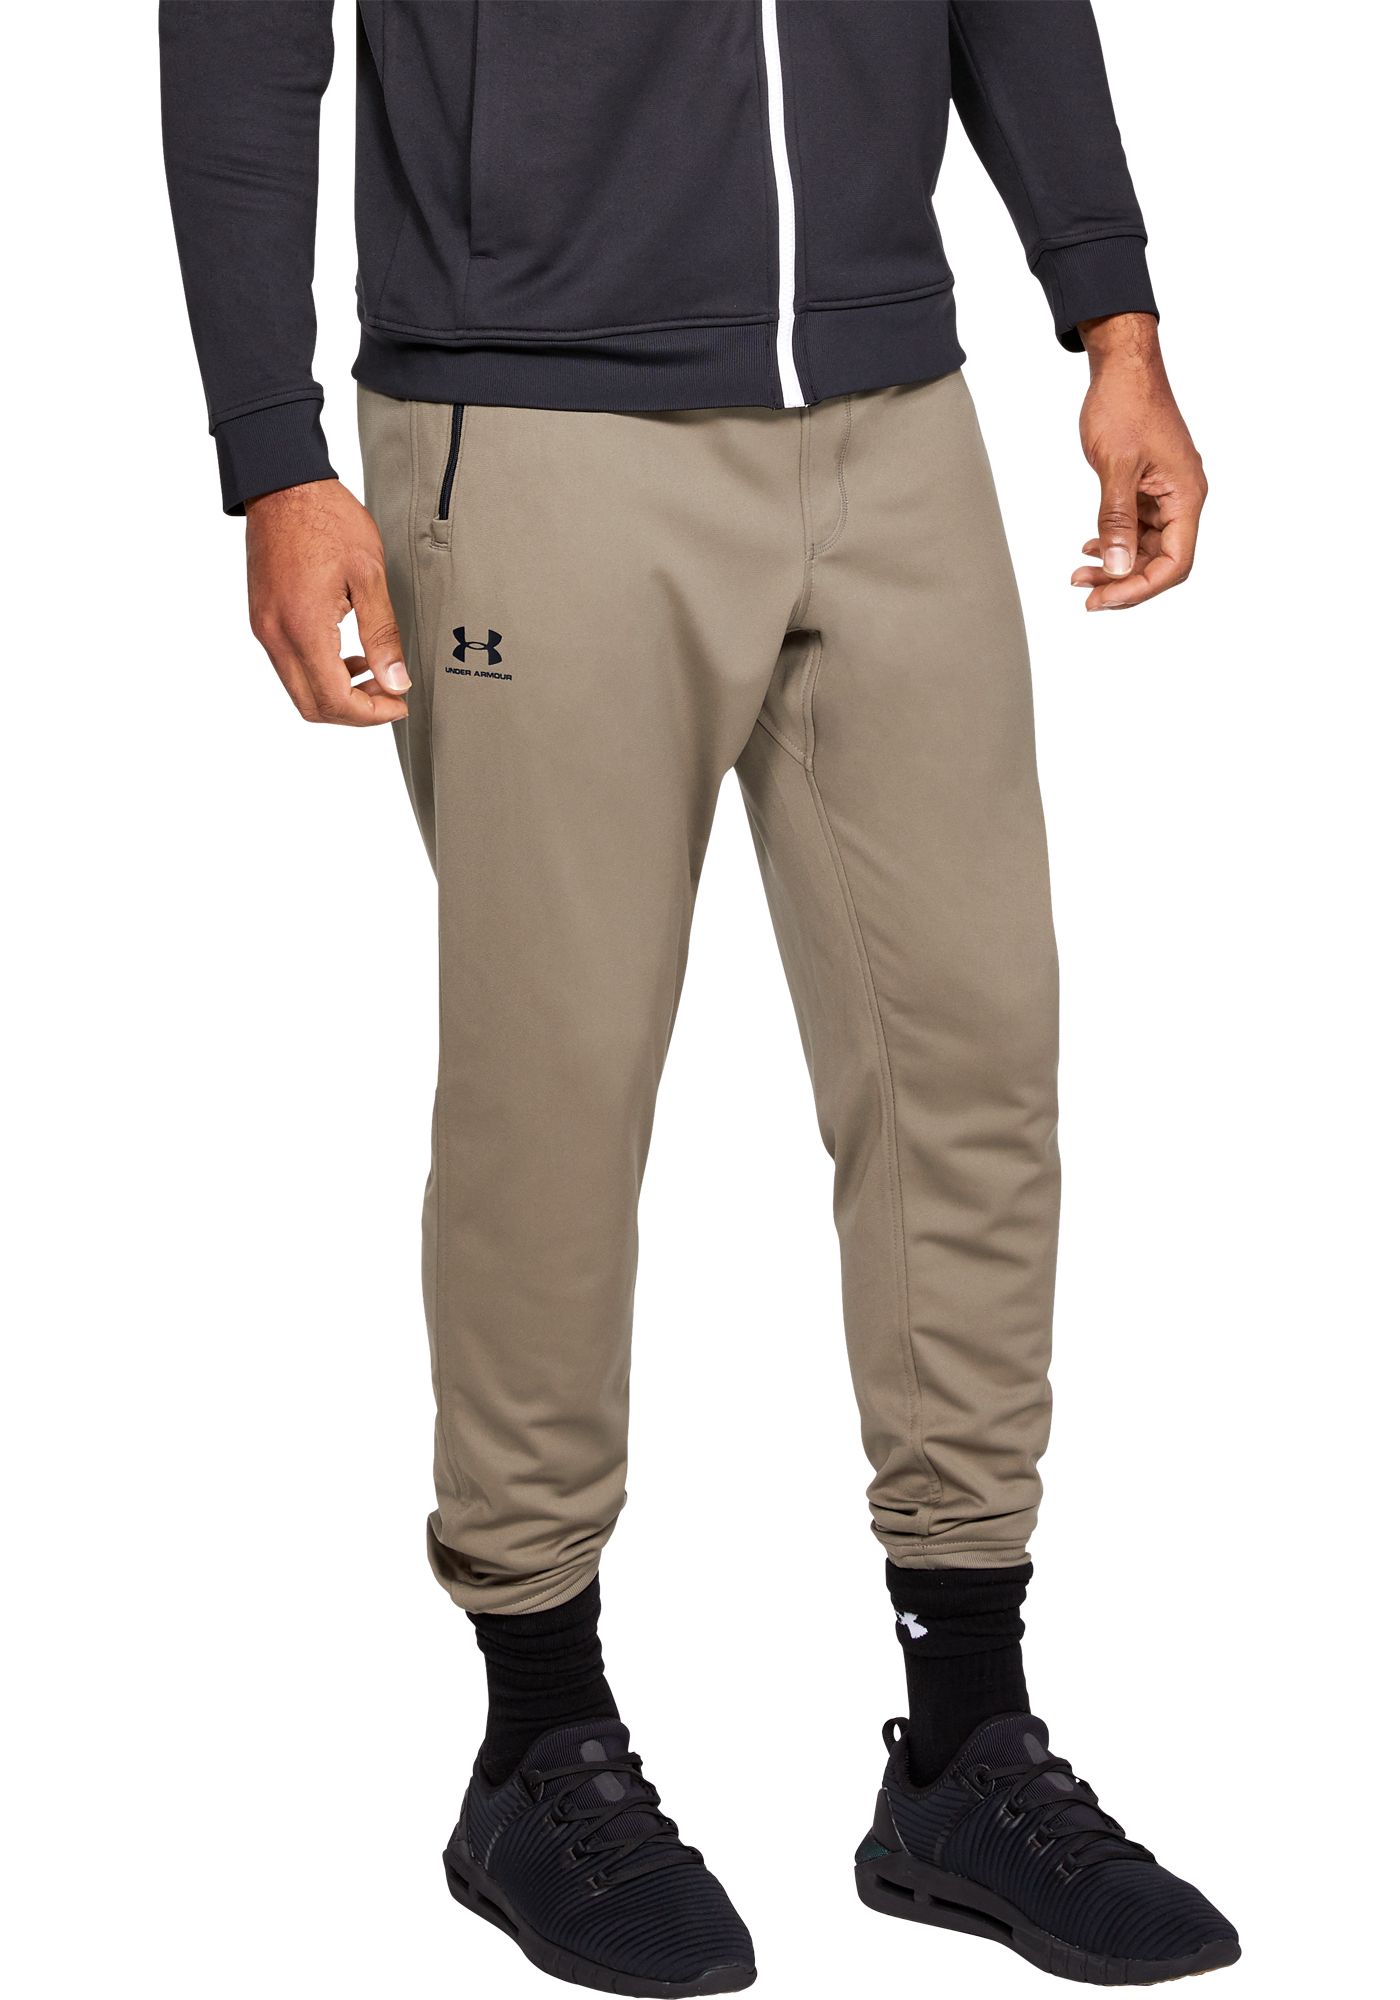 Under Armour Men's Sportstyle Joggers | DICK'S Sporting Goods